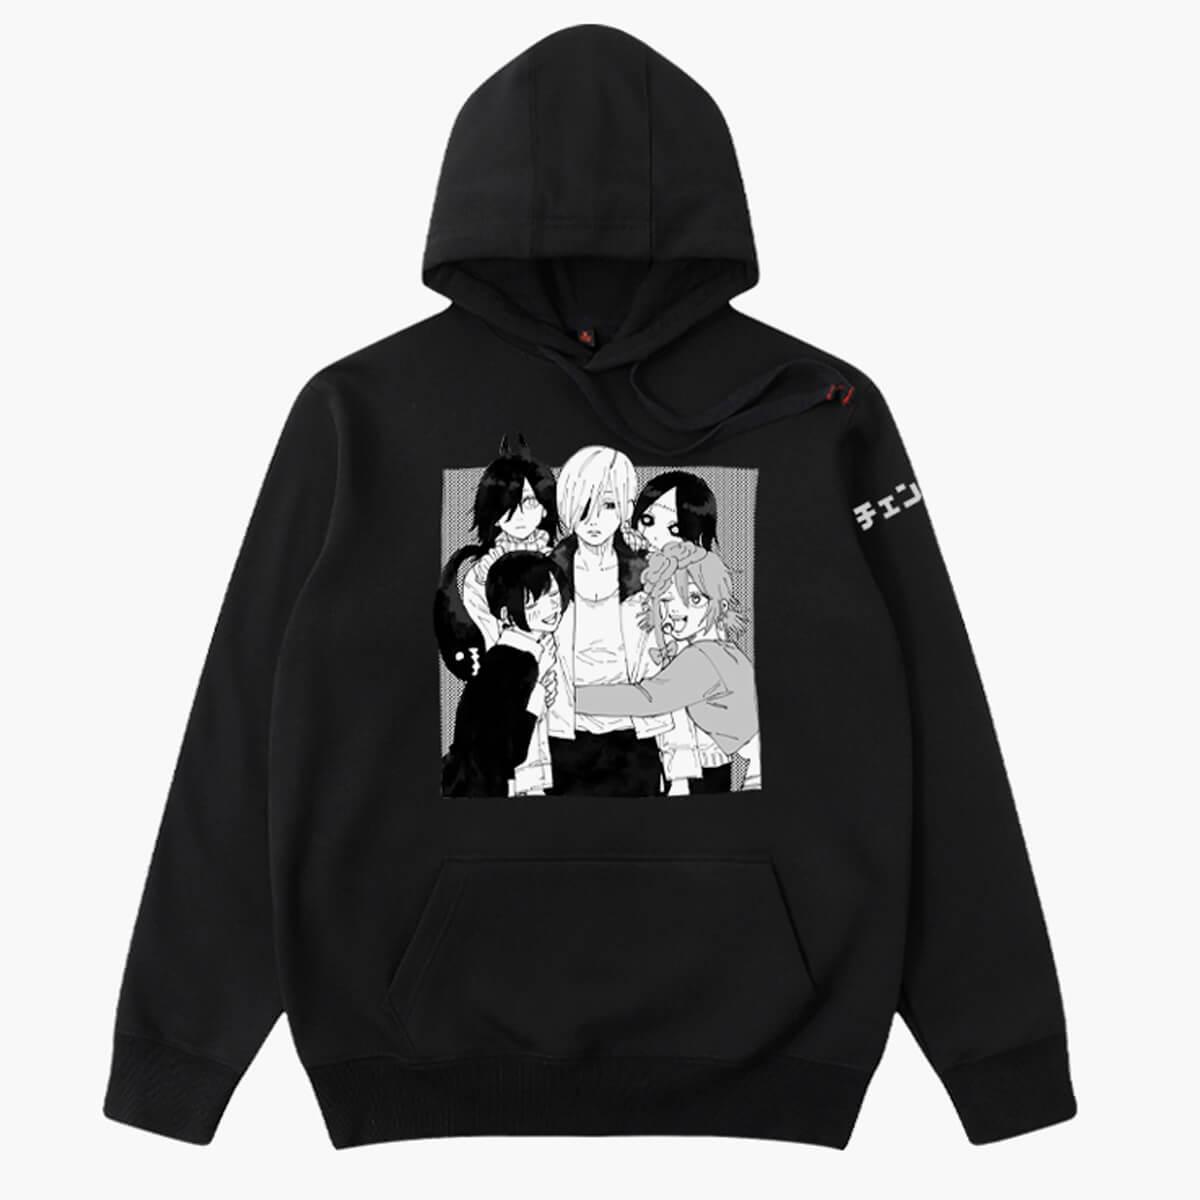 Chainsaw Man Girls Hugging Quanxi Hoodie - Aesthetic Clothes Shop